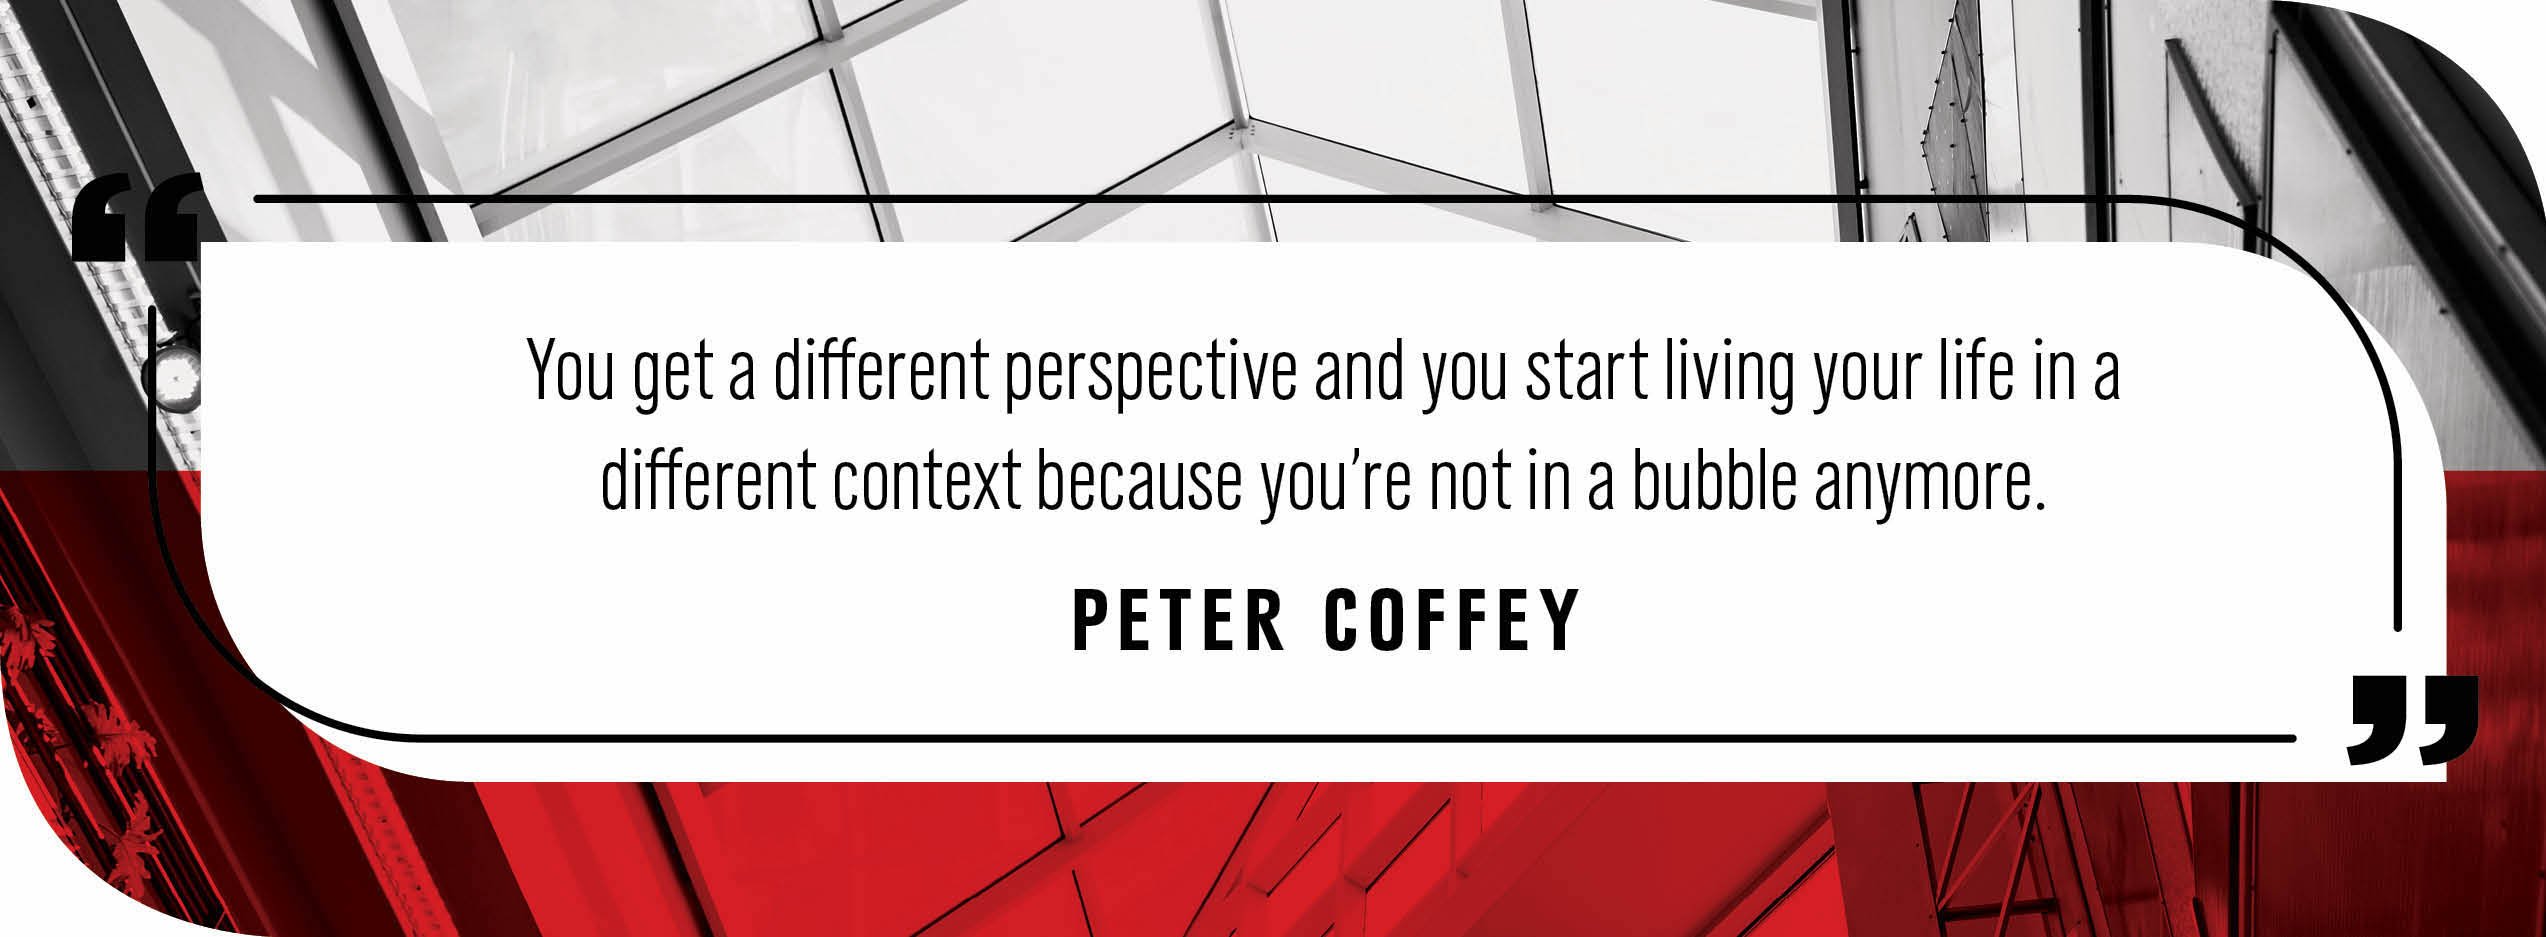 Quote by Peter Coffey: "You get a different perspective and you start living your life in a different context because you’re not in a bubble anymore."